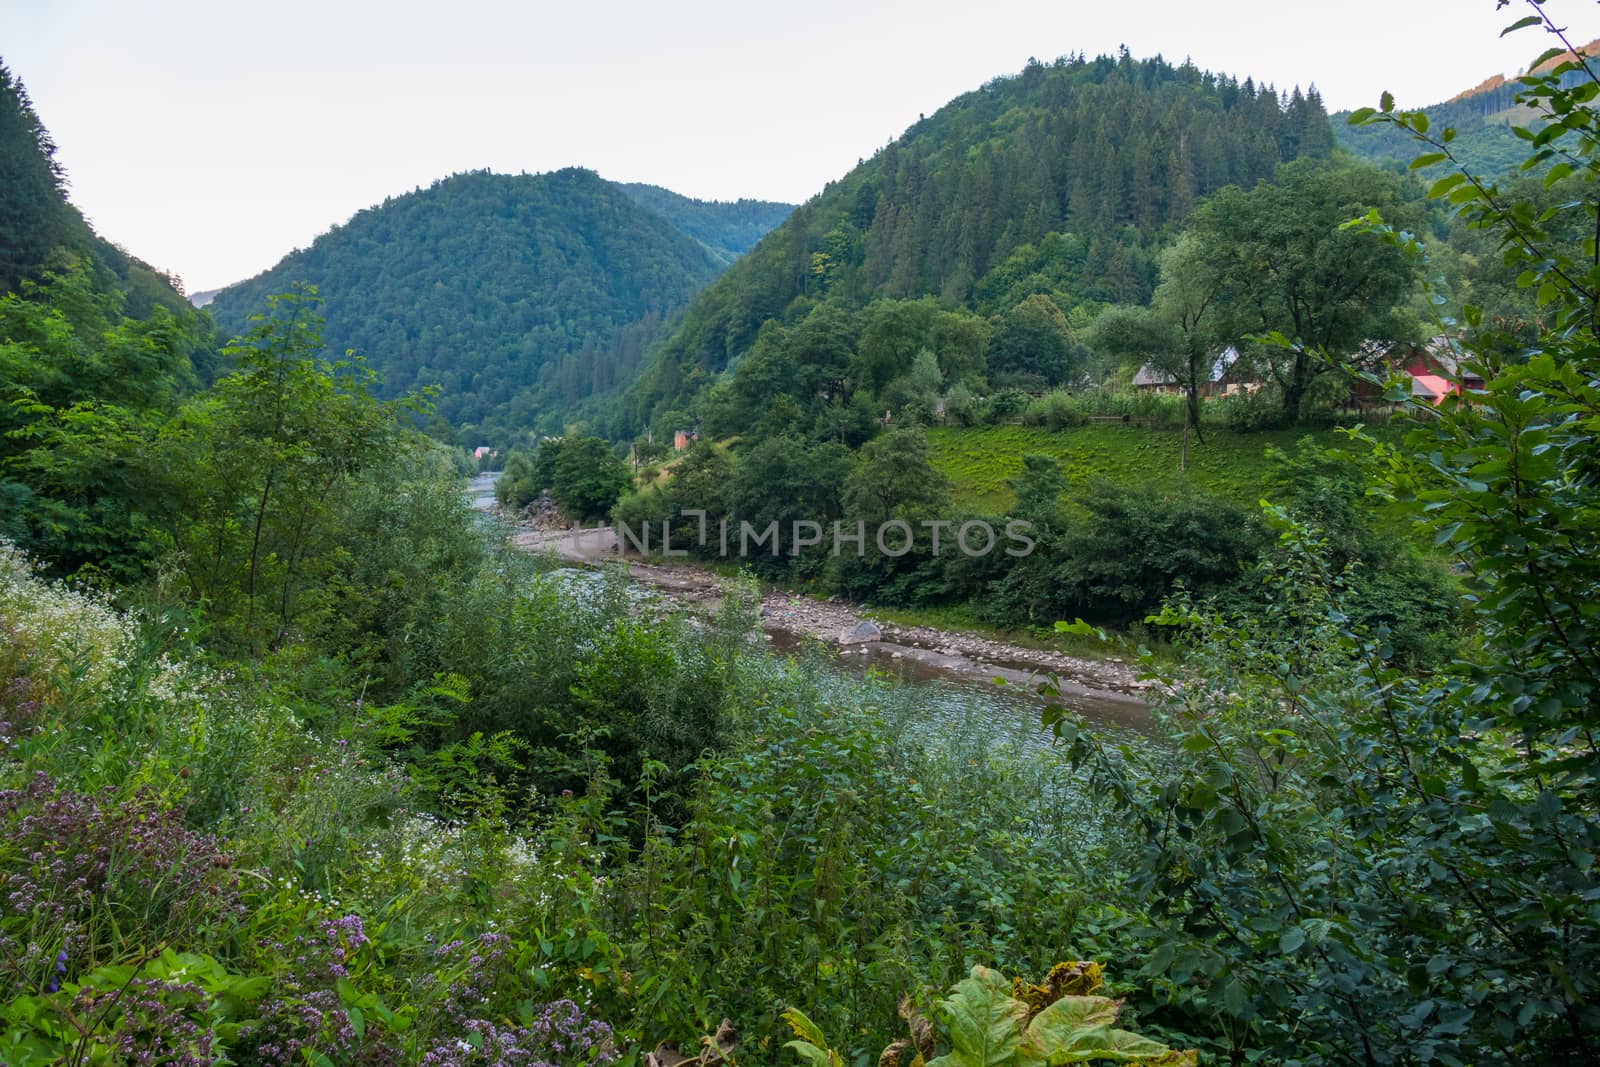 An ideal place to relax. Greenery of trees and grass, clean fresh air, beautiful mountain landscape by Adamchuk